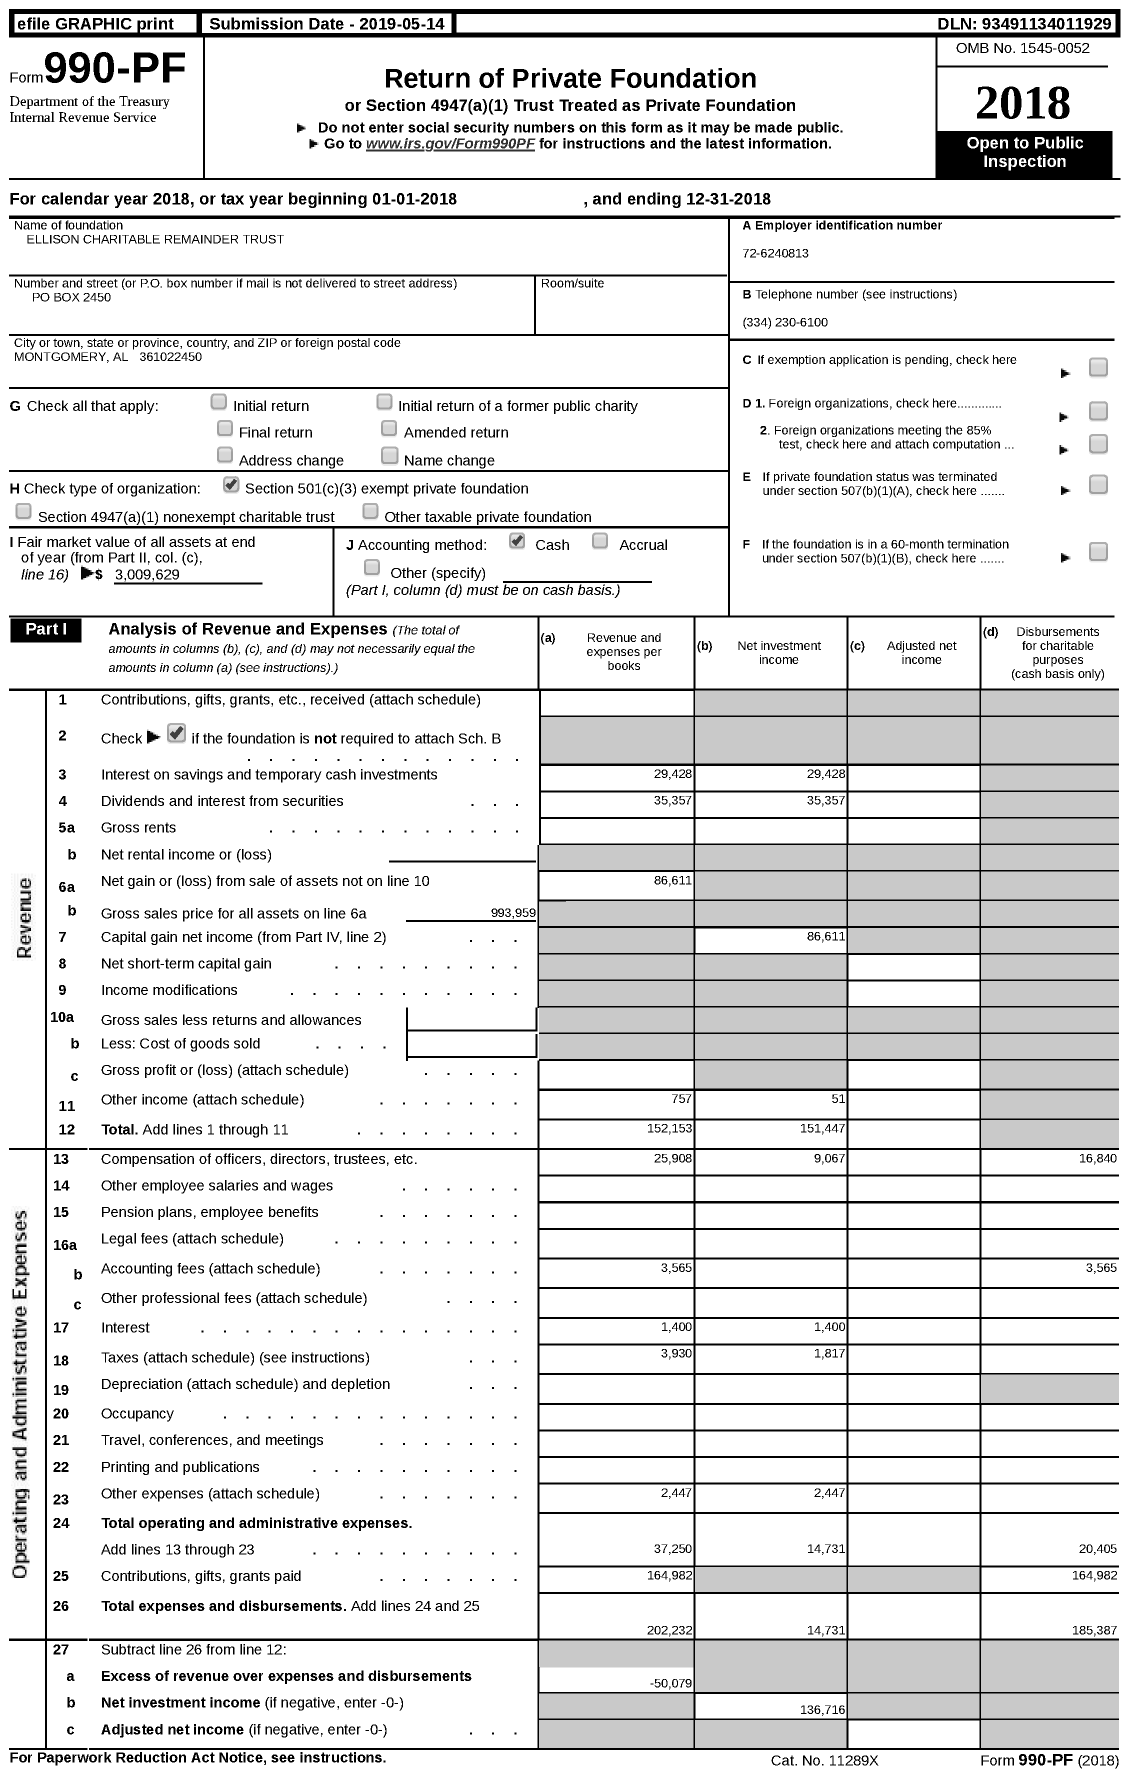 Image of first page of 2018 Form 990PF for Ellison Charitable Remainder Trust